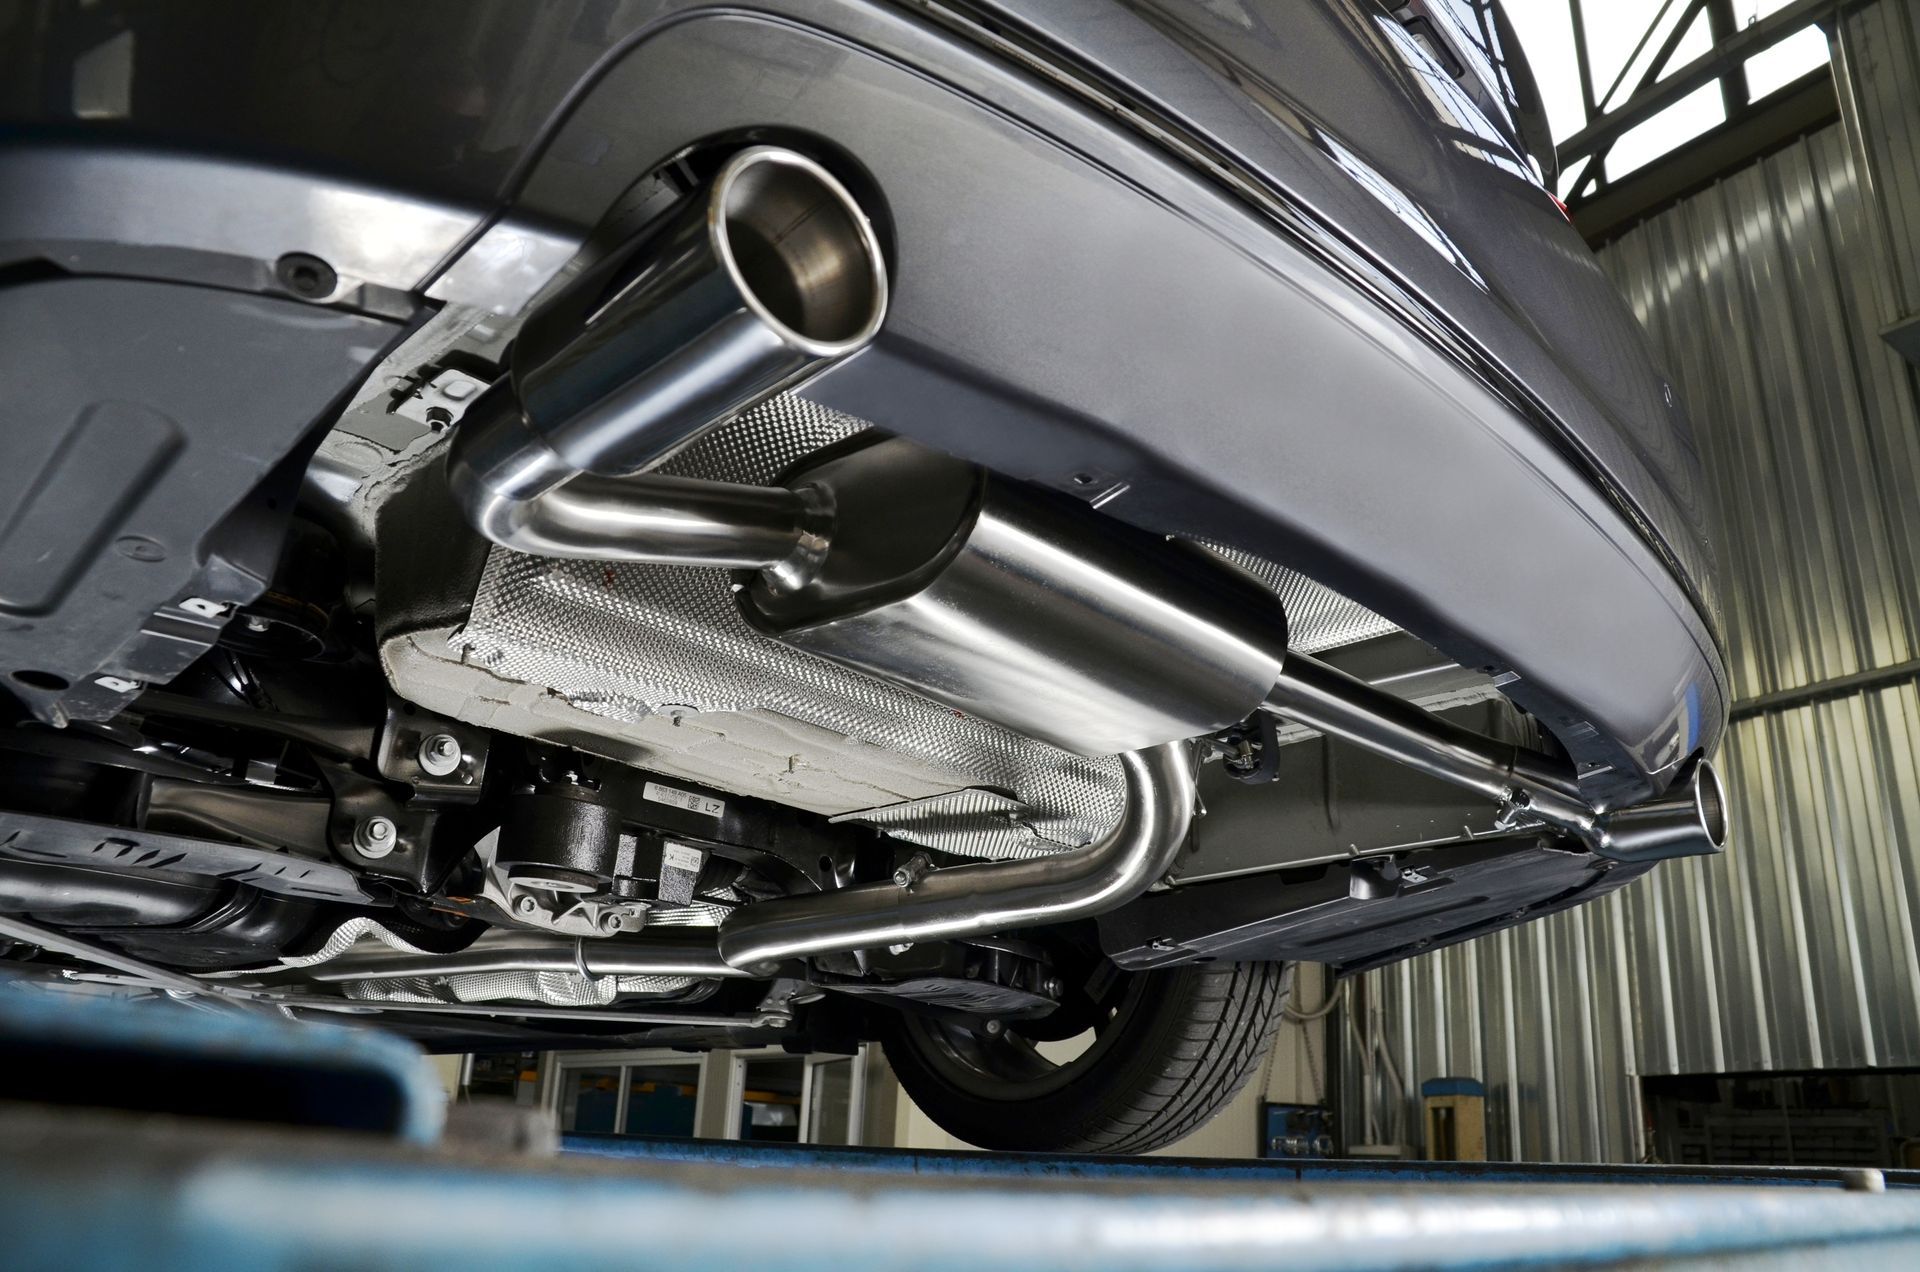 Exhaust Service at ﻿Ryan's Auto Care﻿ in ﻿Lake Mills, WI﻿